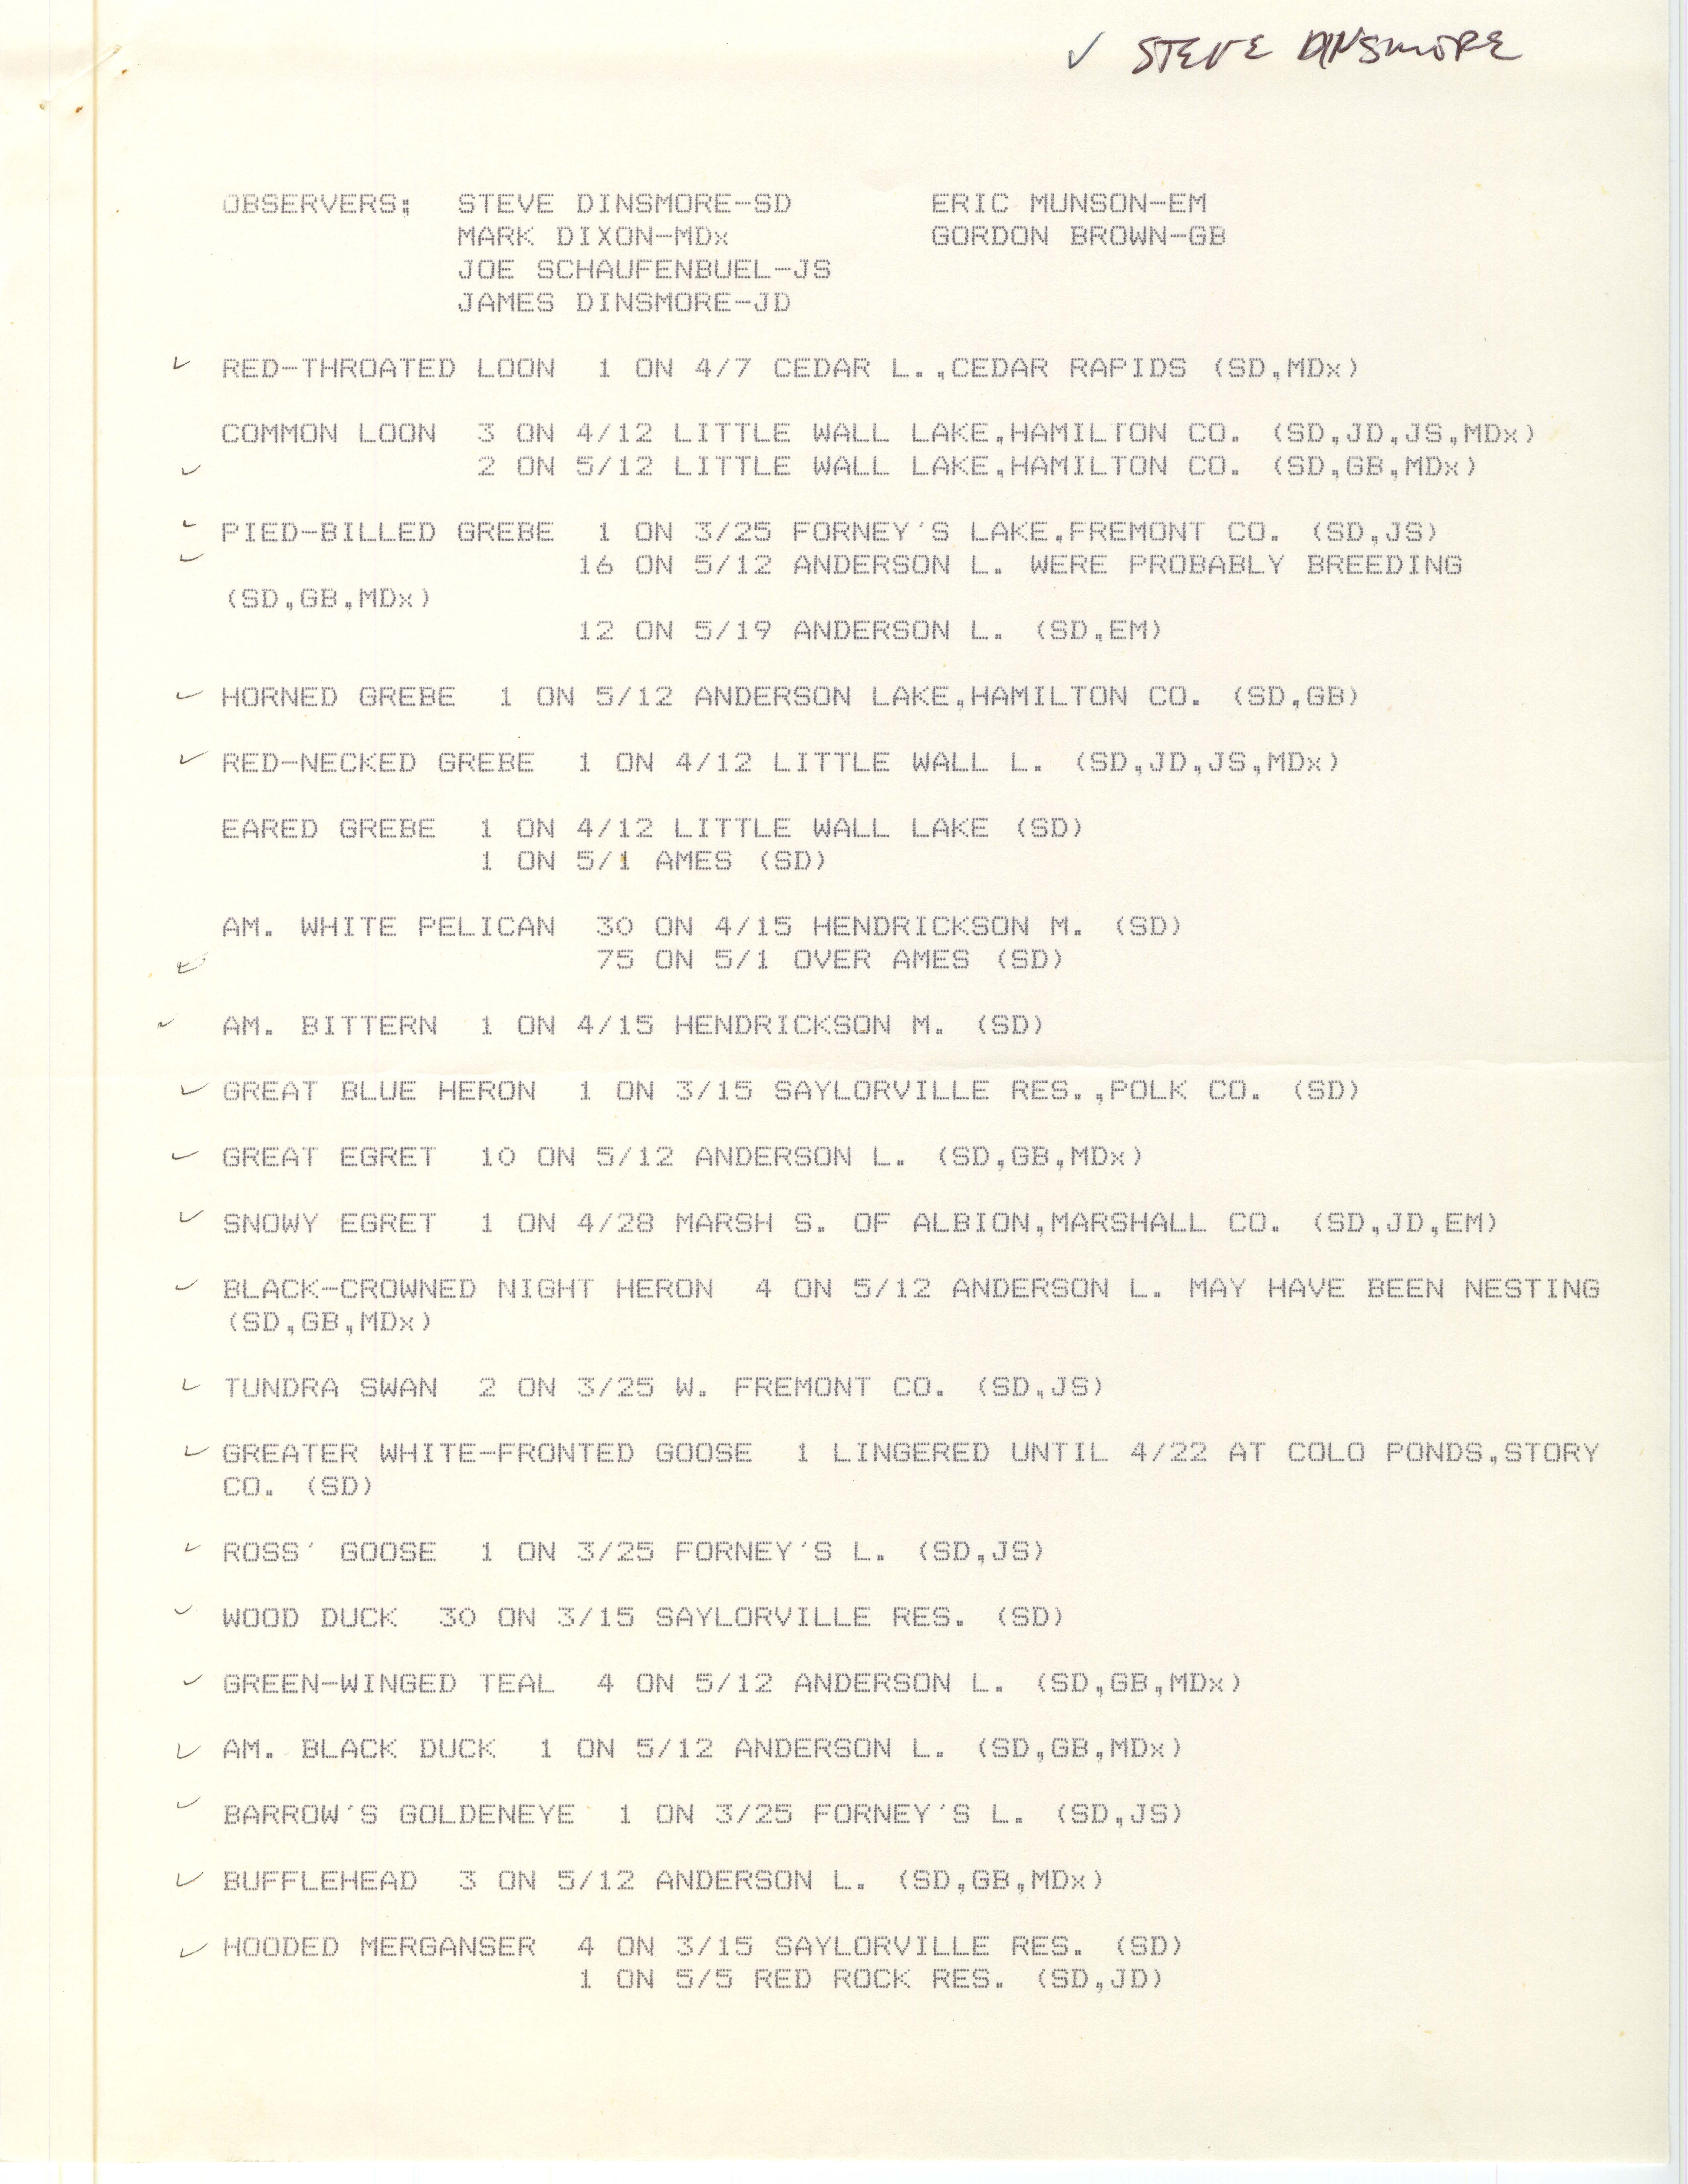 Field notes contributed by Stephen J. Dinsmore, spring 1984